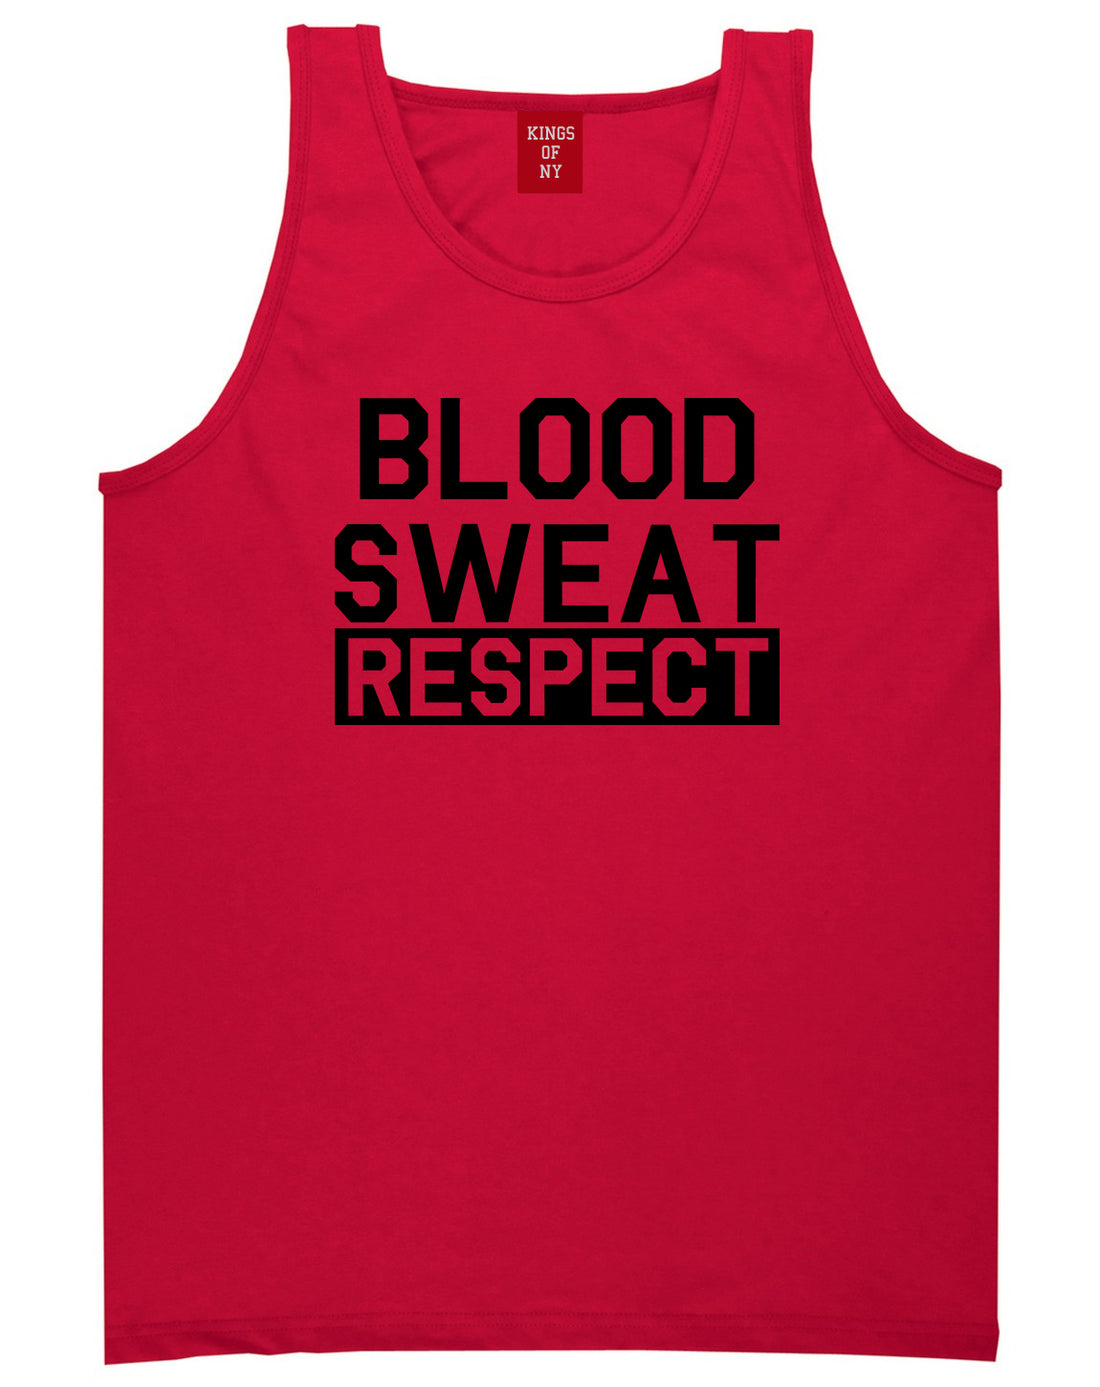 Blood Sweat Respect Gym Workout Mens Tank Top Shirt Red by Kings Of NY